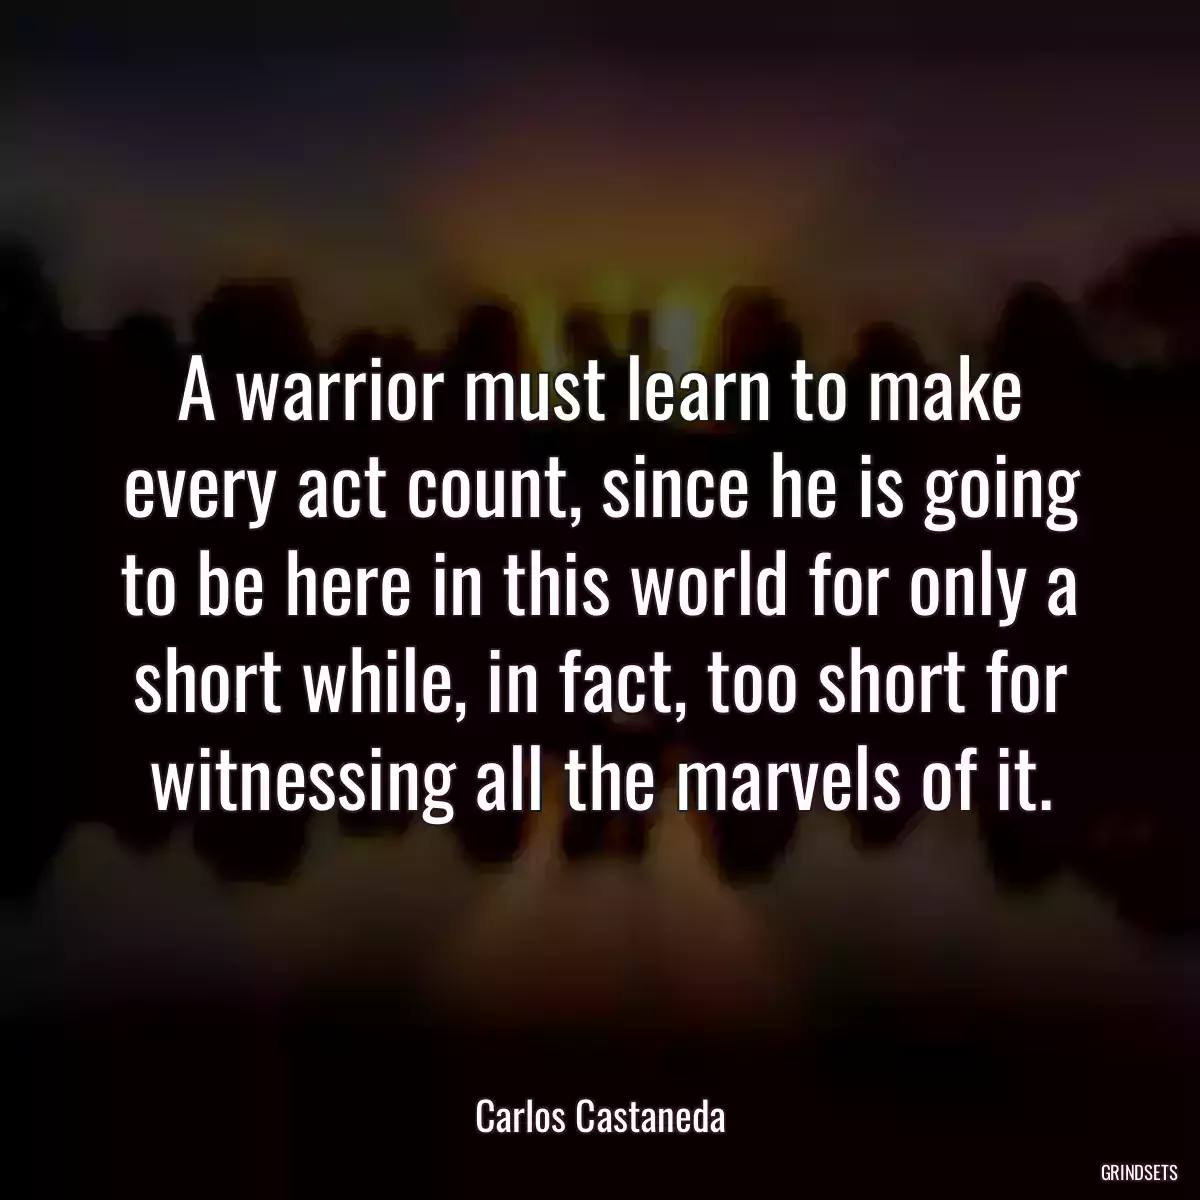 A warrior must learn to make every act count, since he is going to be here in this world for only a short while, in fact, too short for witnessing all the marvels of it.